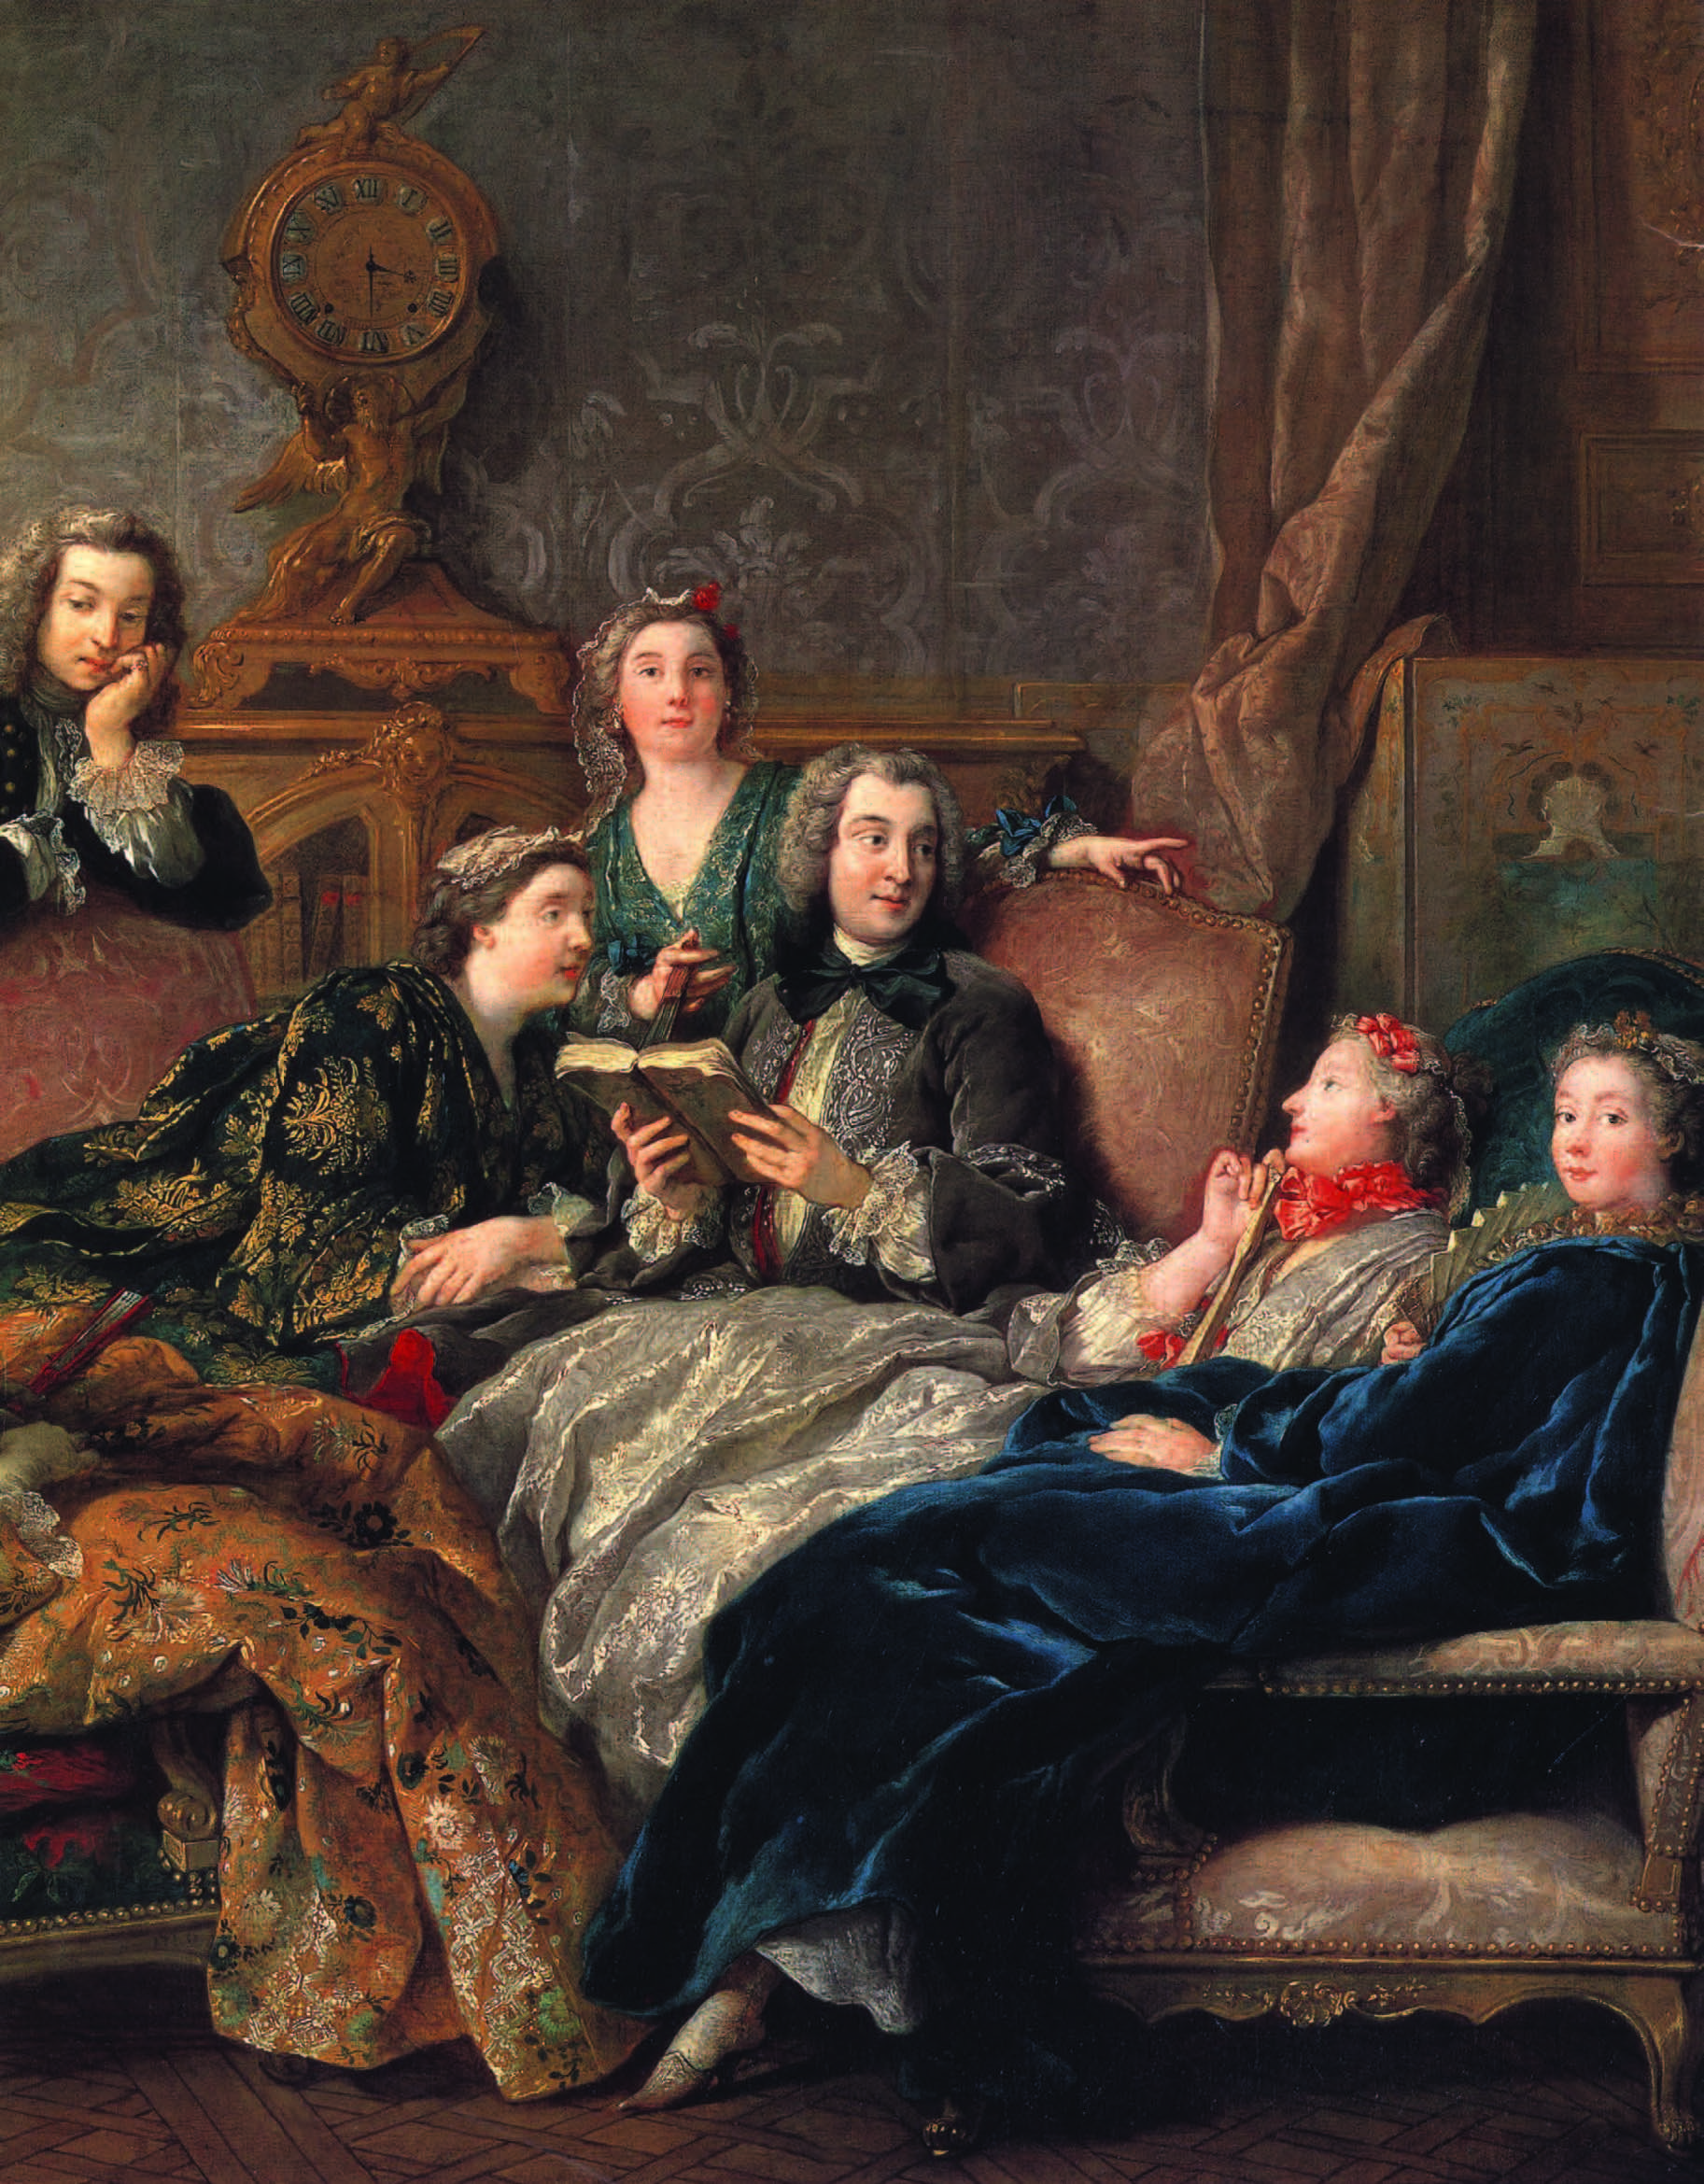 Dangerous Liaisons: Fashion and Furniture in the Eighteenth Century